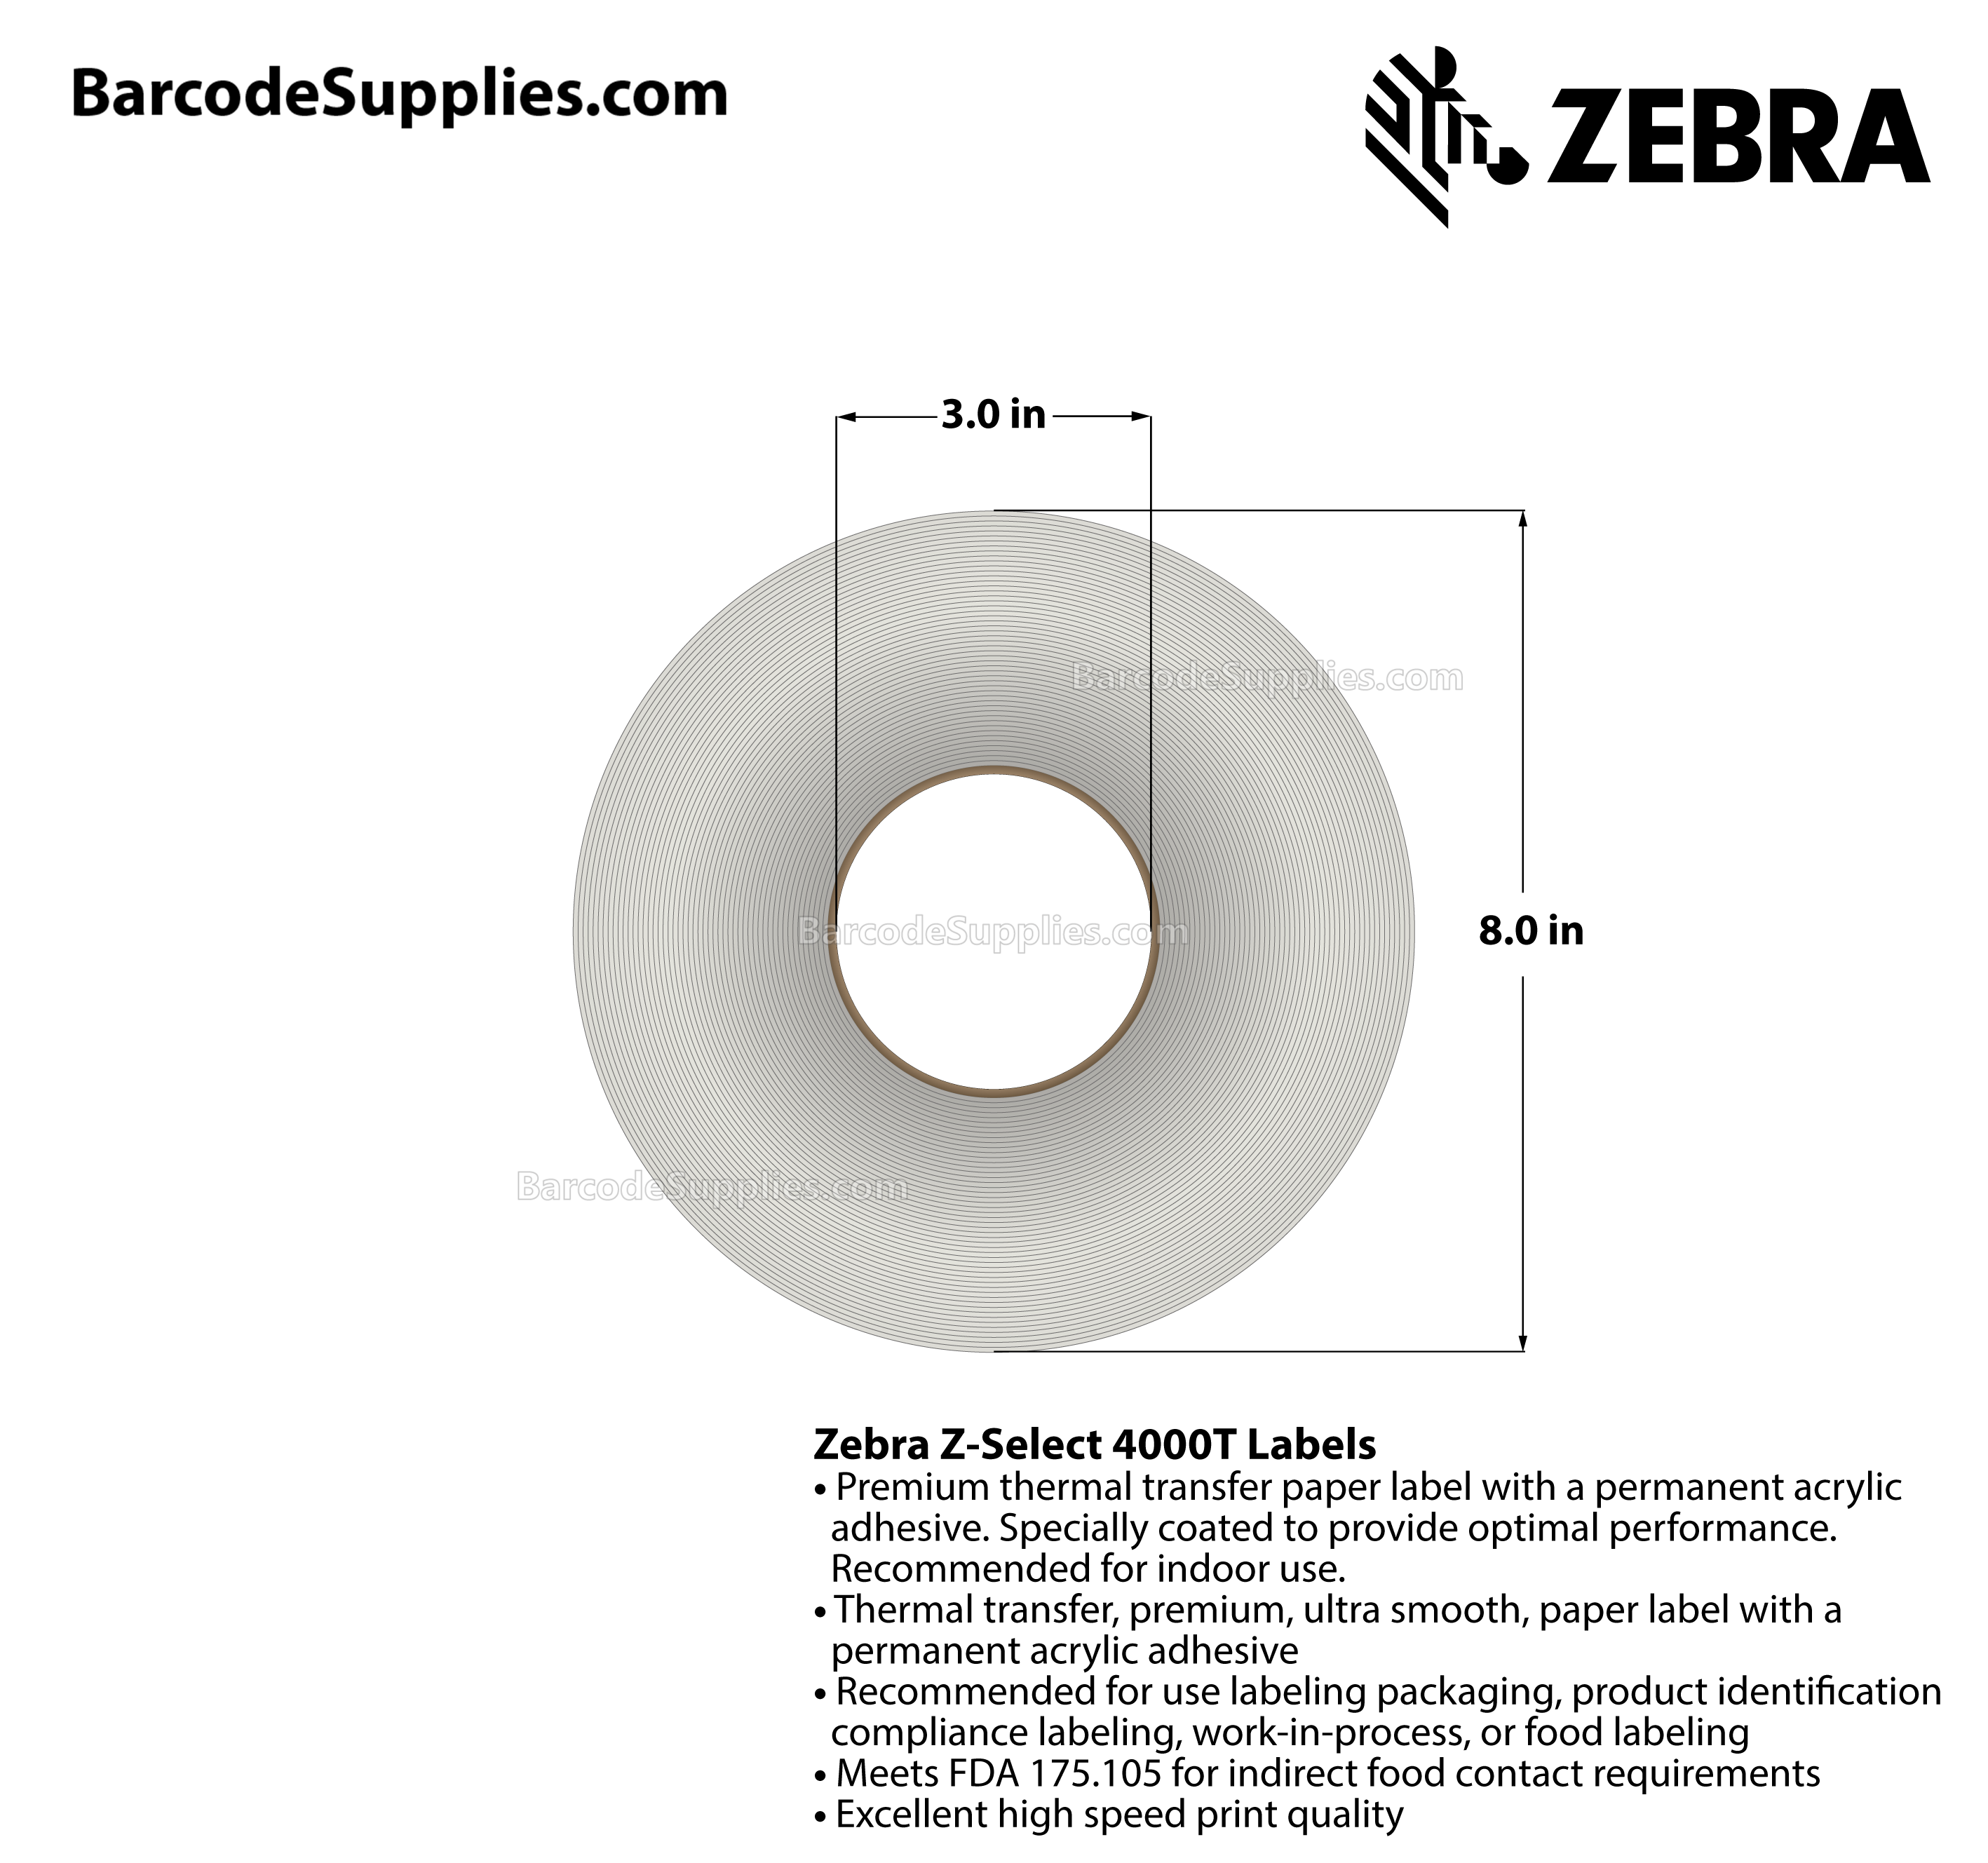 2 x 1 Thermal Transfer White Z-Select 4000T Labels With Permanent Adhesive - Not Perforated - 5180 Labels Per Roll - Carton Of 10 Rolls - 51800 Labels Total - MPN: 72281